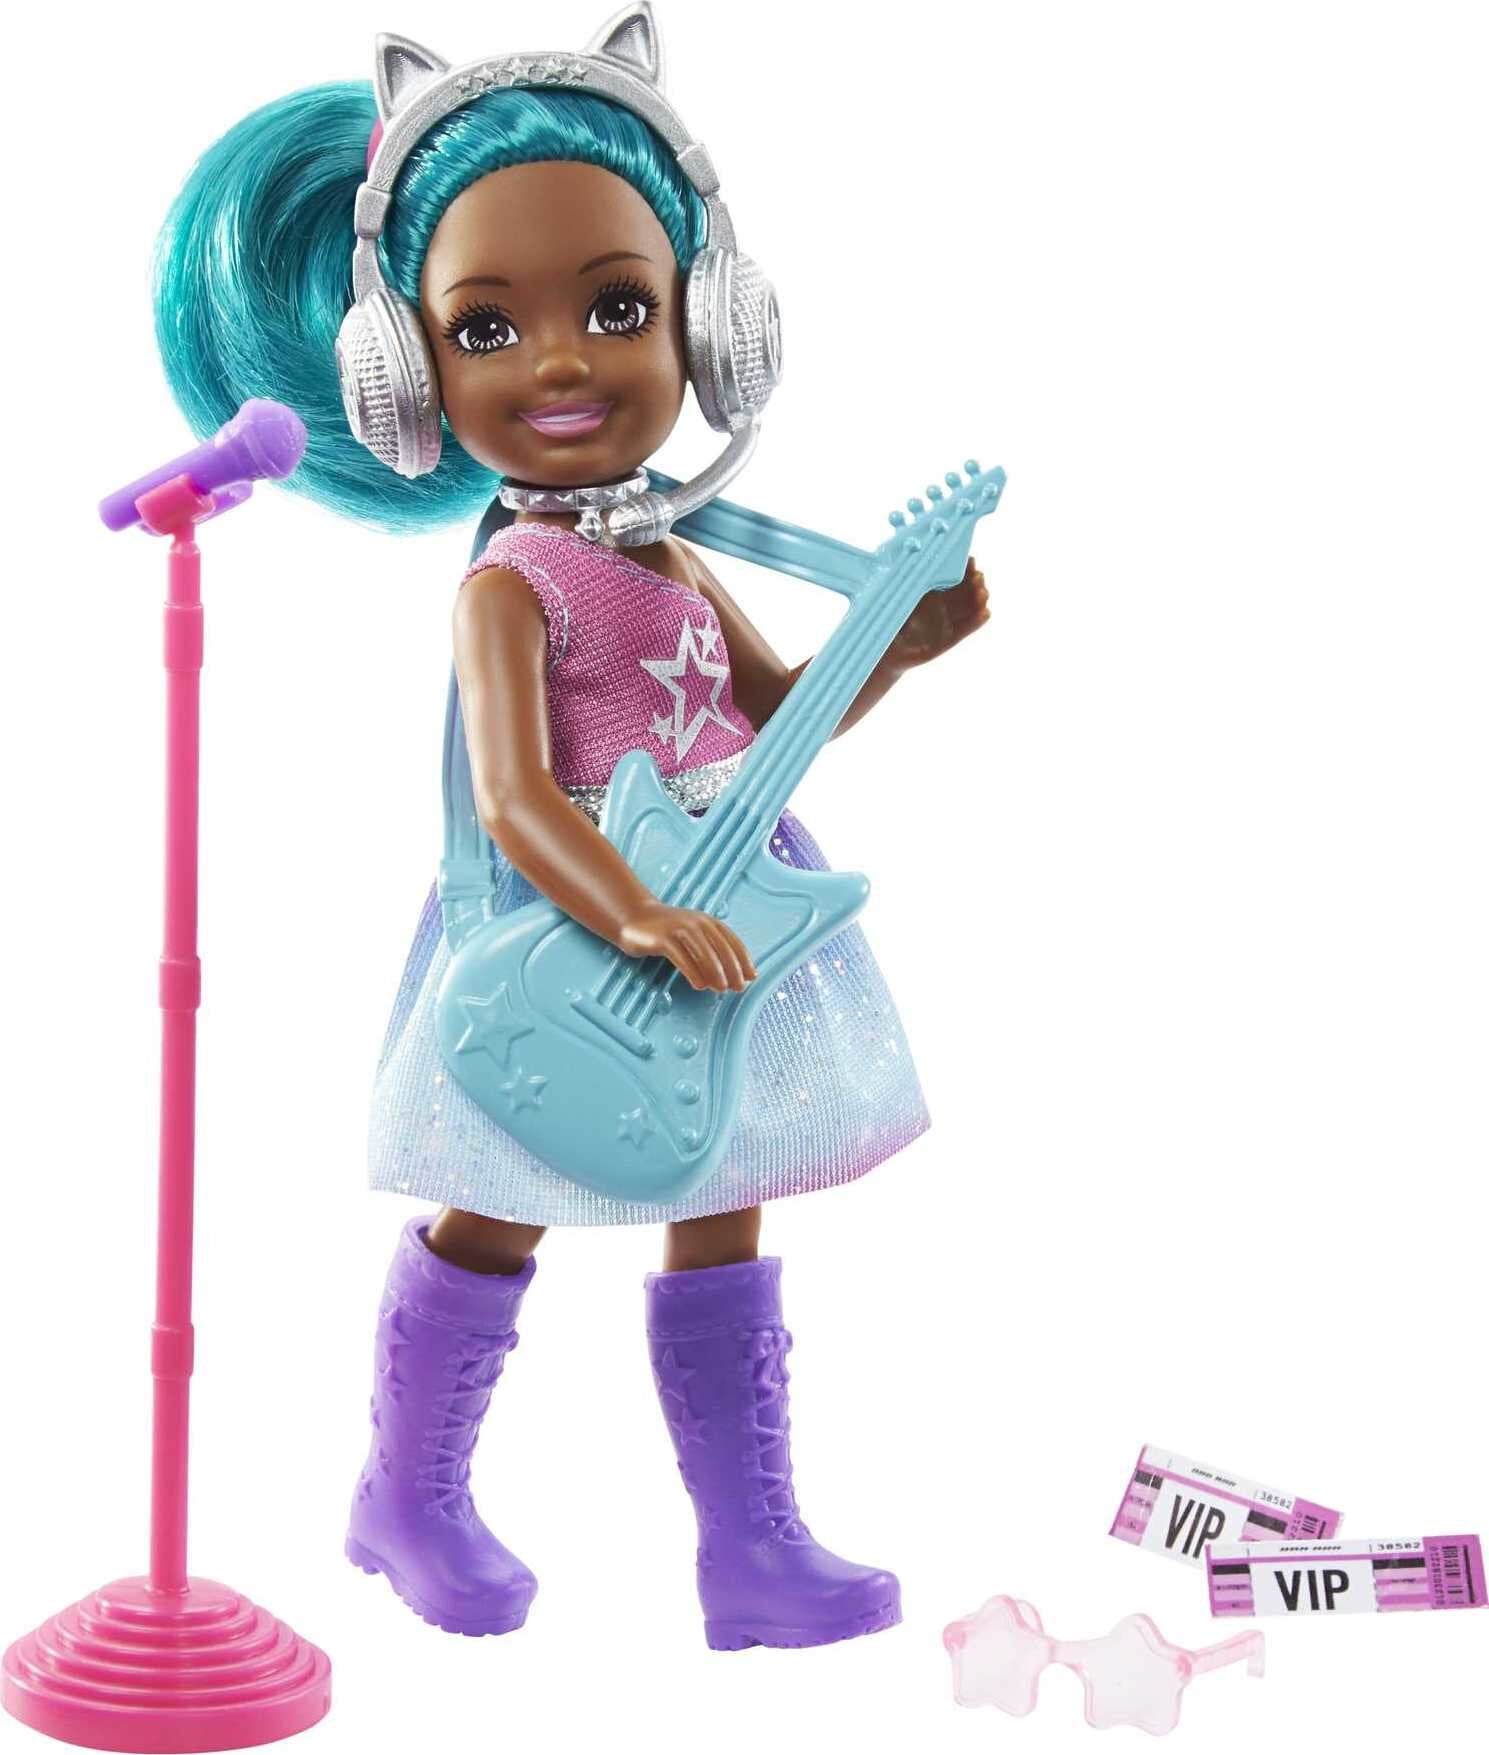 Picture of DDI 2372705 Barbie Chelsea Can Be Rock Star Doll with Accessories - Pack of 6